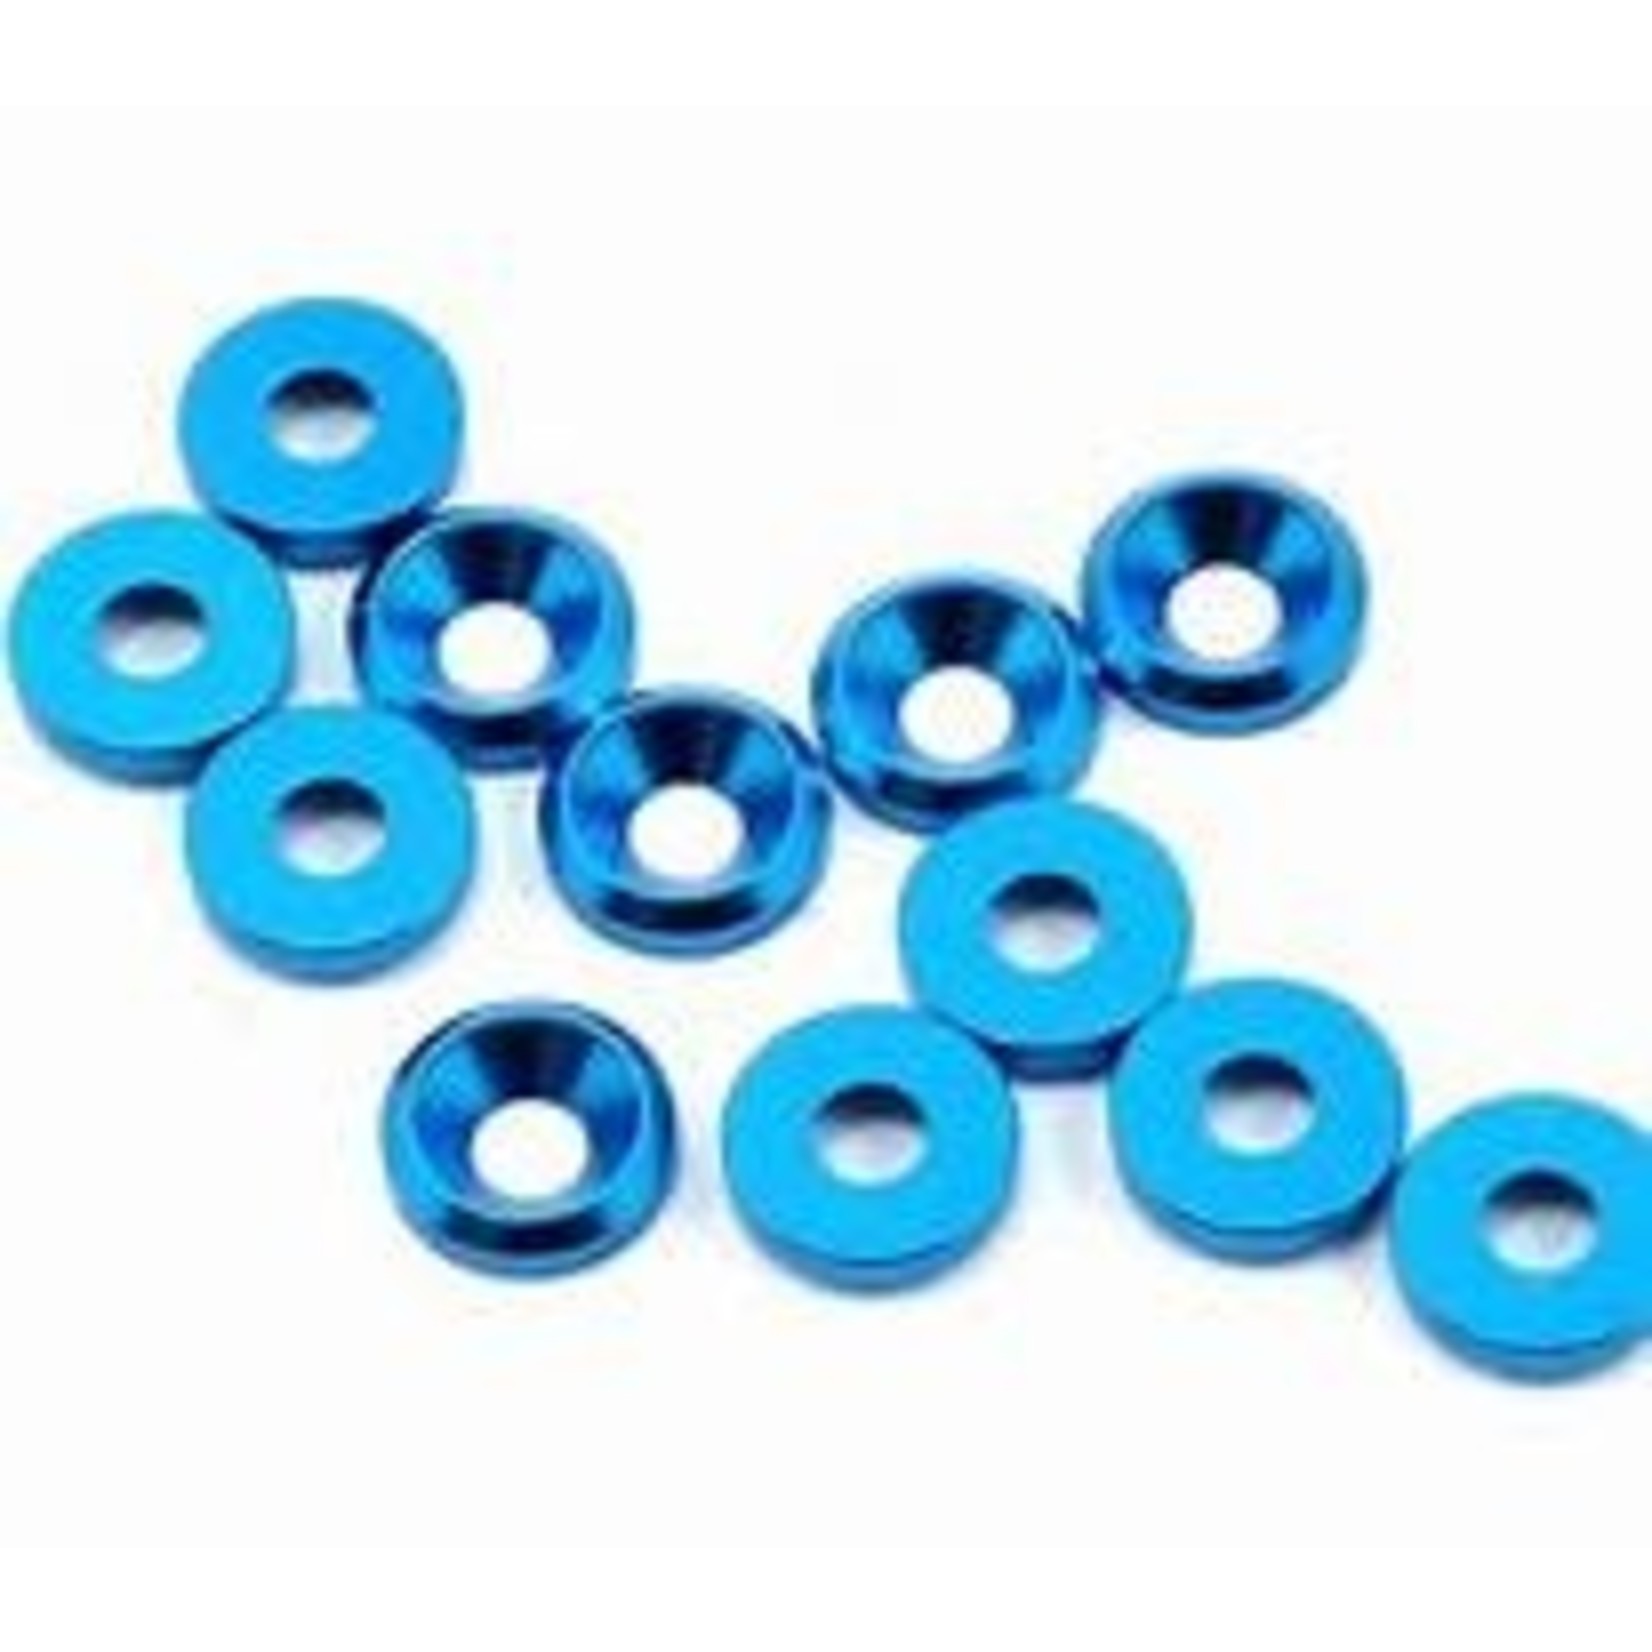 3mm Countersunk Washer (Blue) (12)